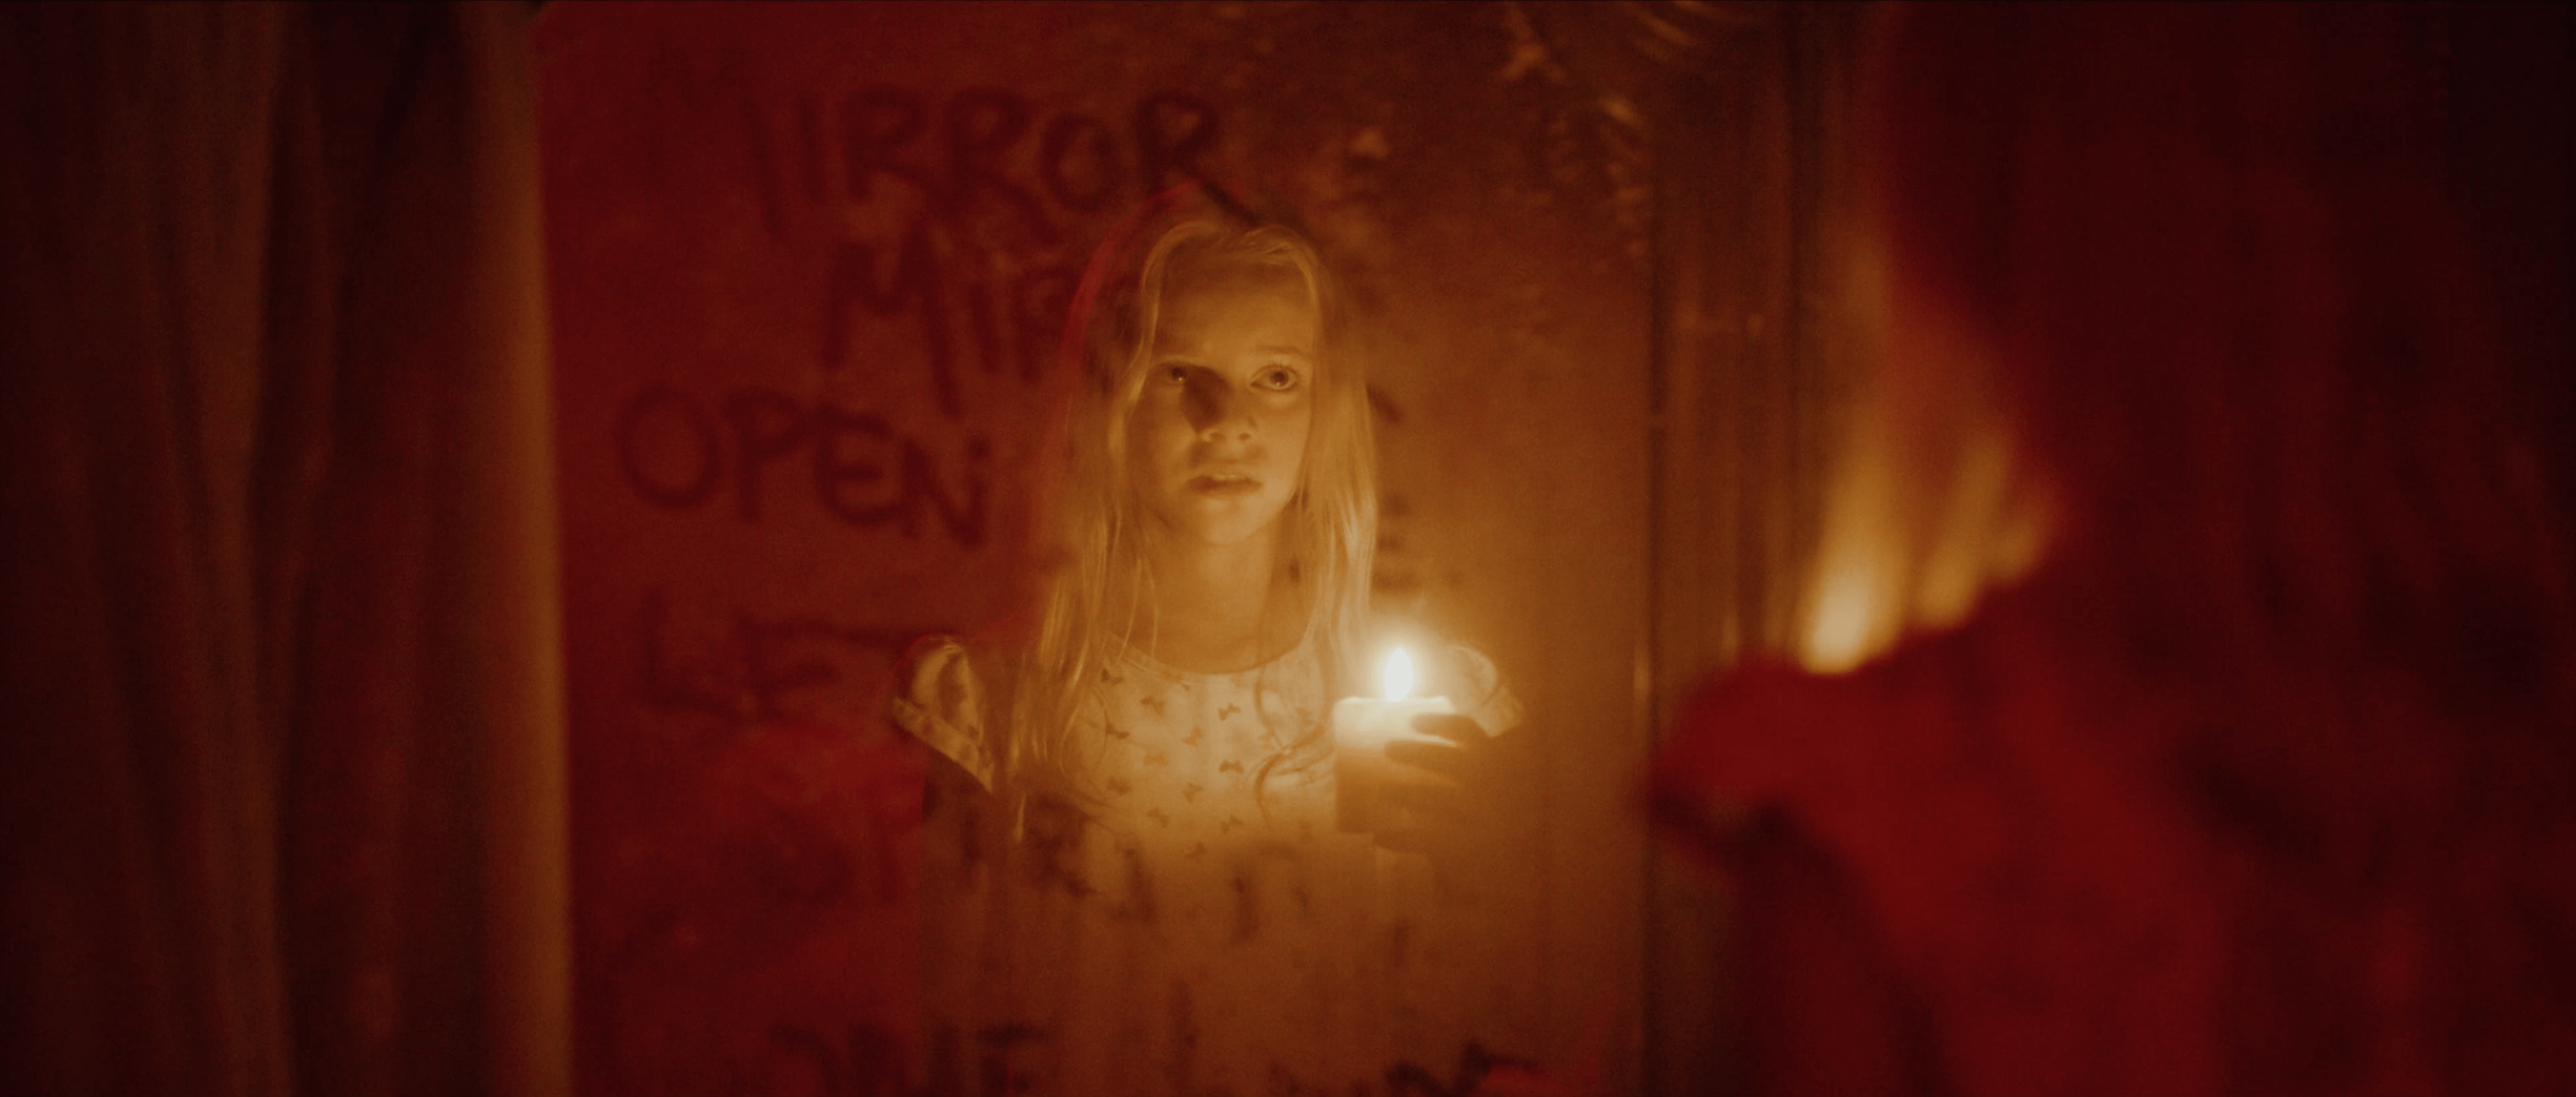 Review: ‘Behind You’Looks In The Mirror And Sees A Formulaic Horror Flick